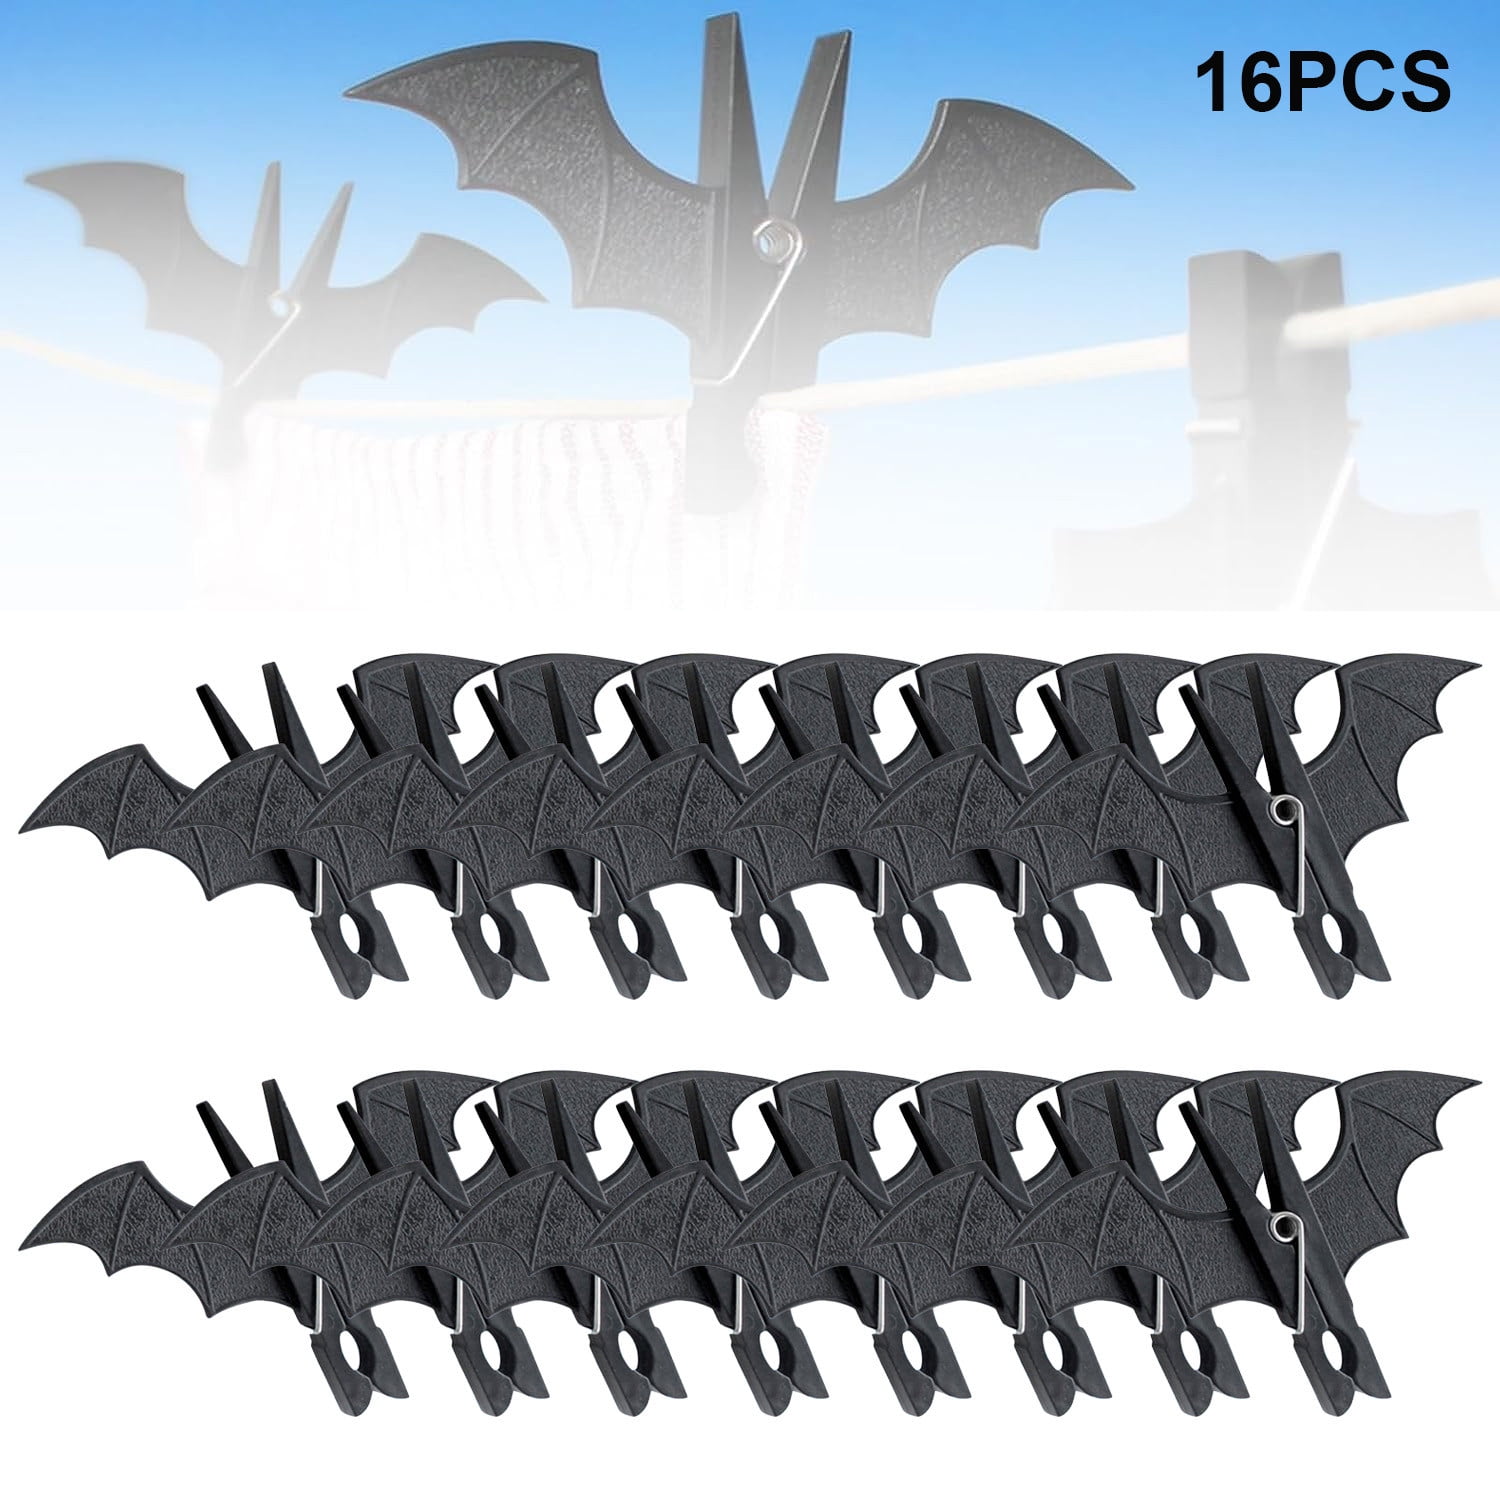 Zeceouar Clearance Items 12pcs Halloween Black Clothes Pins,Windproof Non  Slip Clothesline Clips,Bats Clothes Clips,Black Plastic Clothespin For